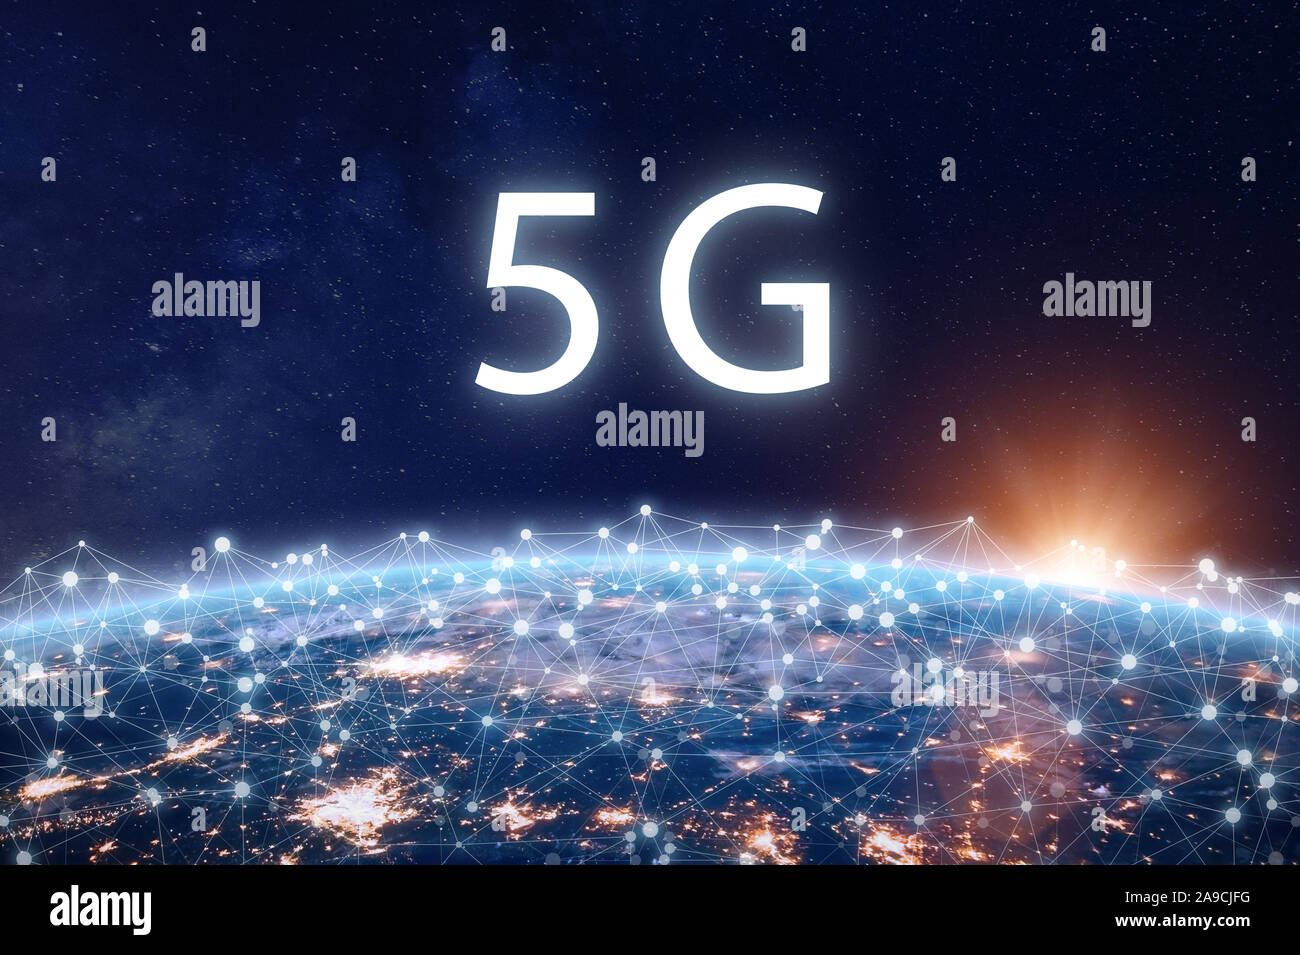 5G mobile internet telecommunication network with high speed wireless data connection technology for smartphones and IoT. Fifth generation system depl Stock Photo